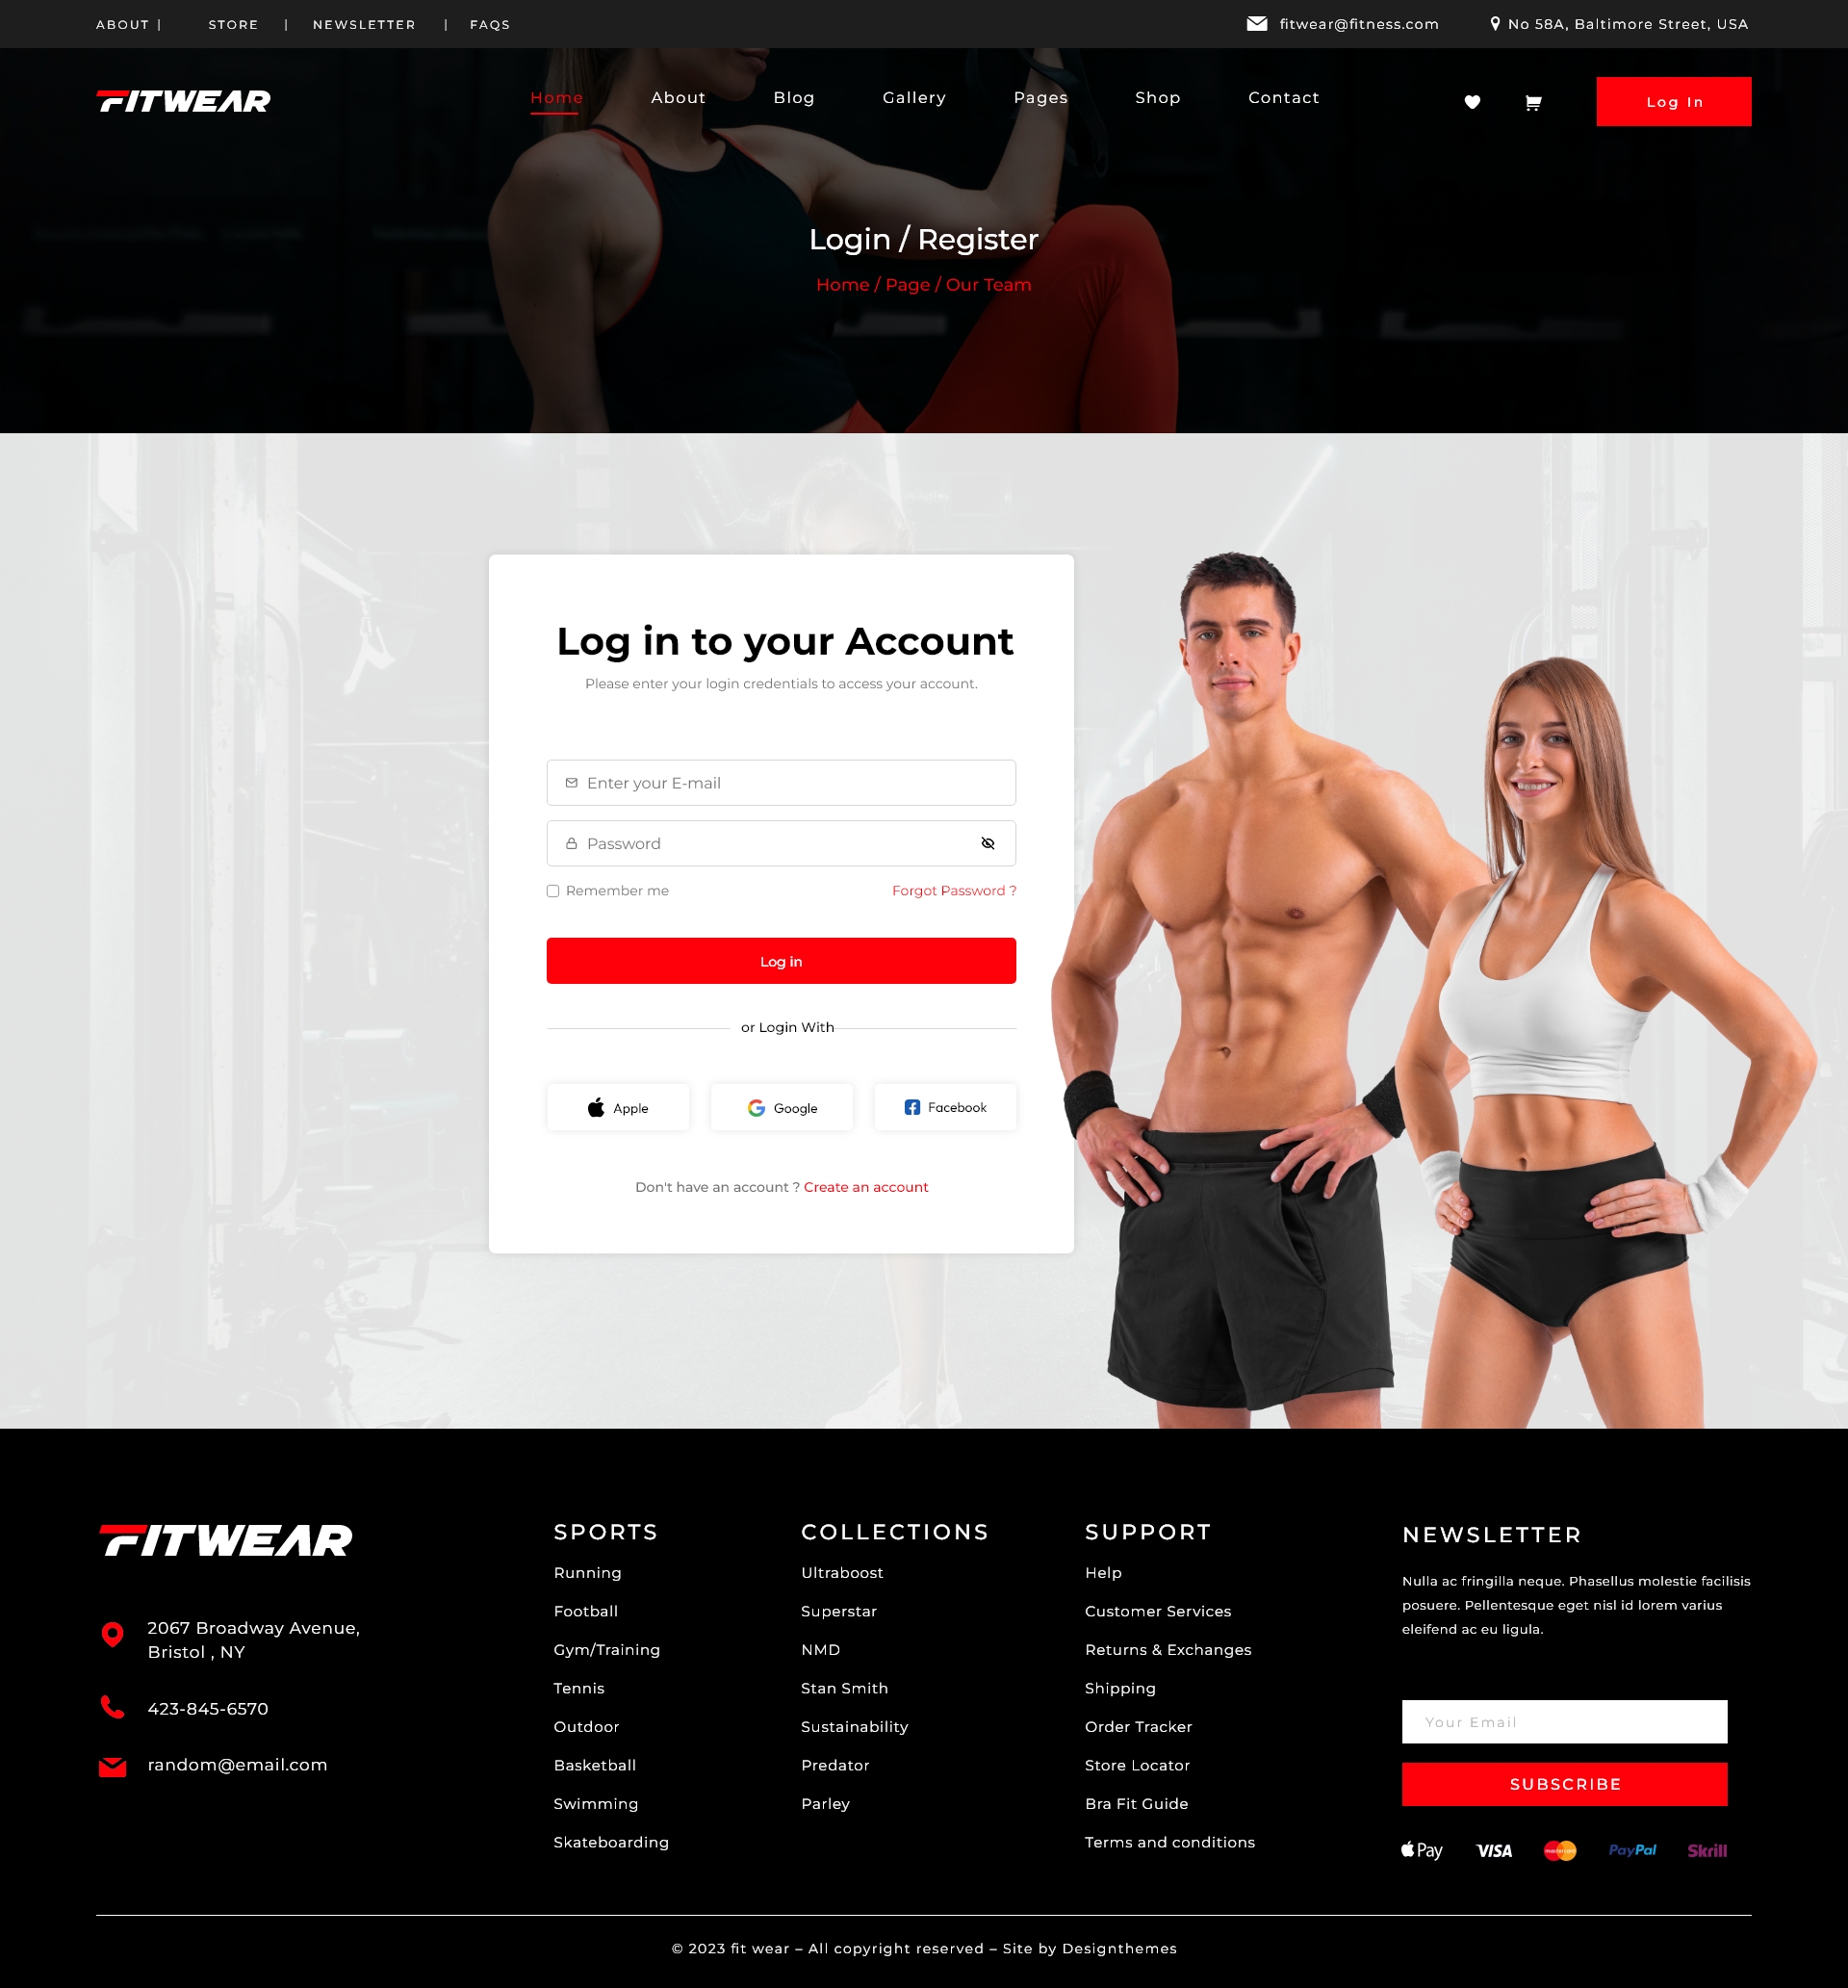 Fitwear - Outdoors Sports Clothing Store & Fitness Shop Website